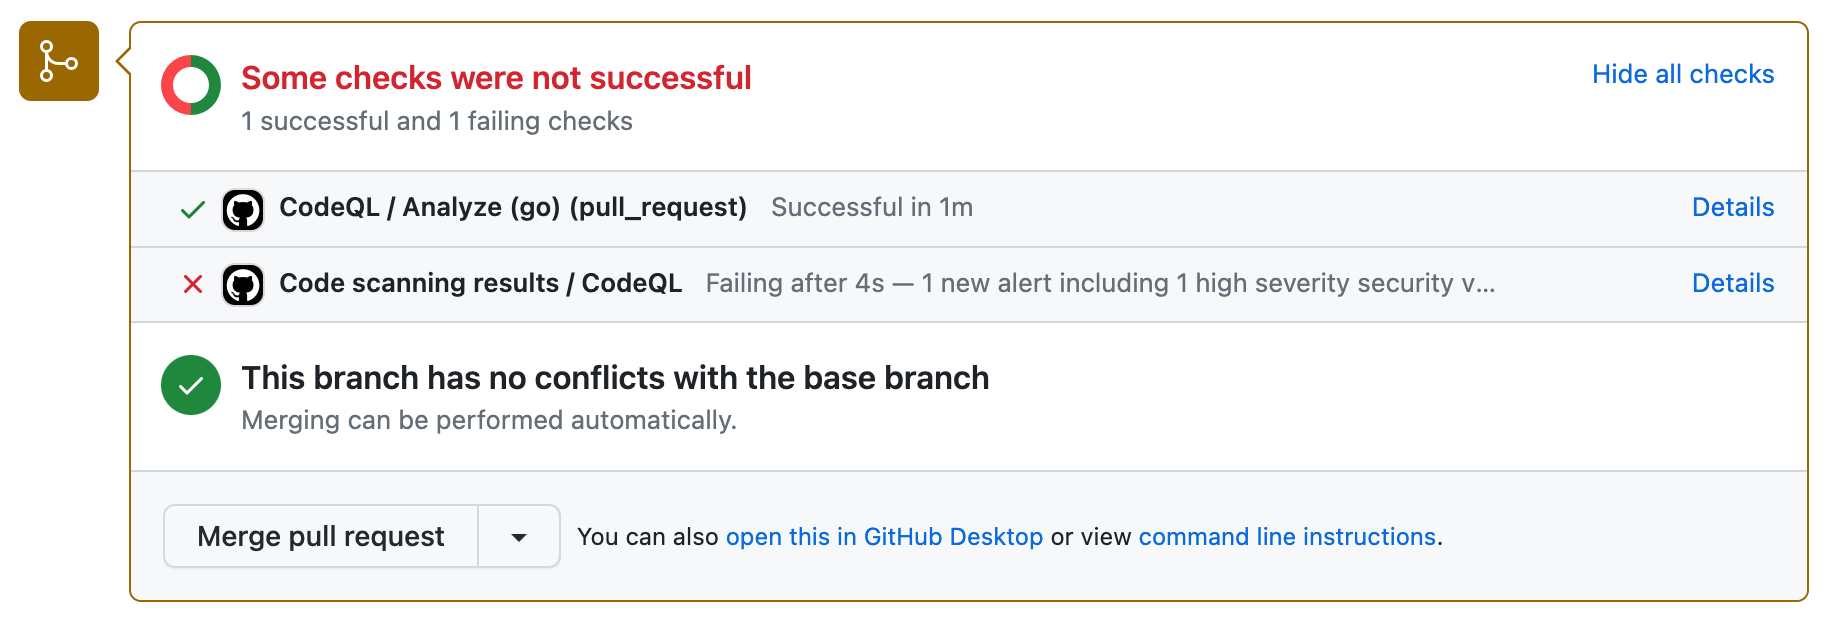 Failed code scanning check on a pull request